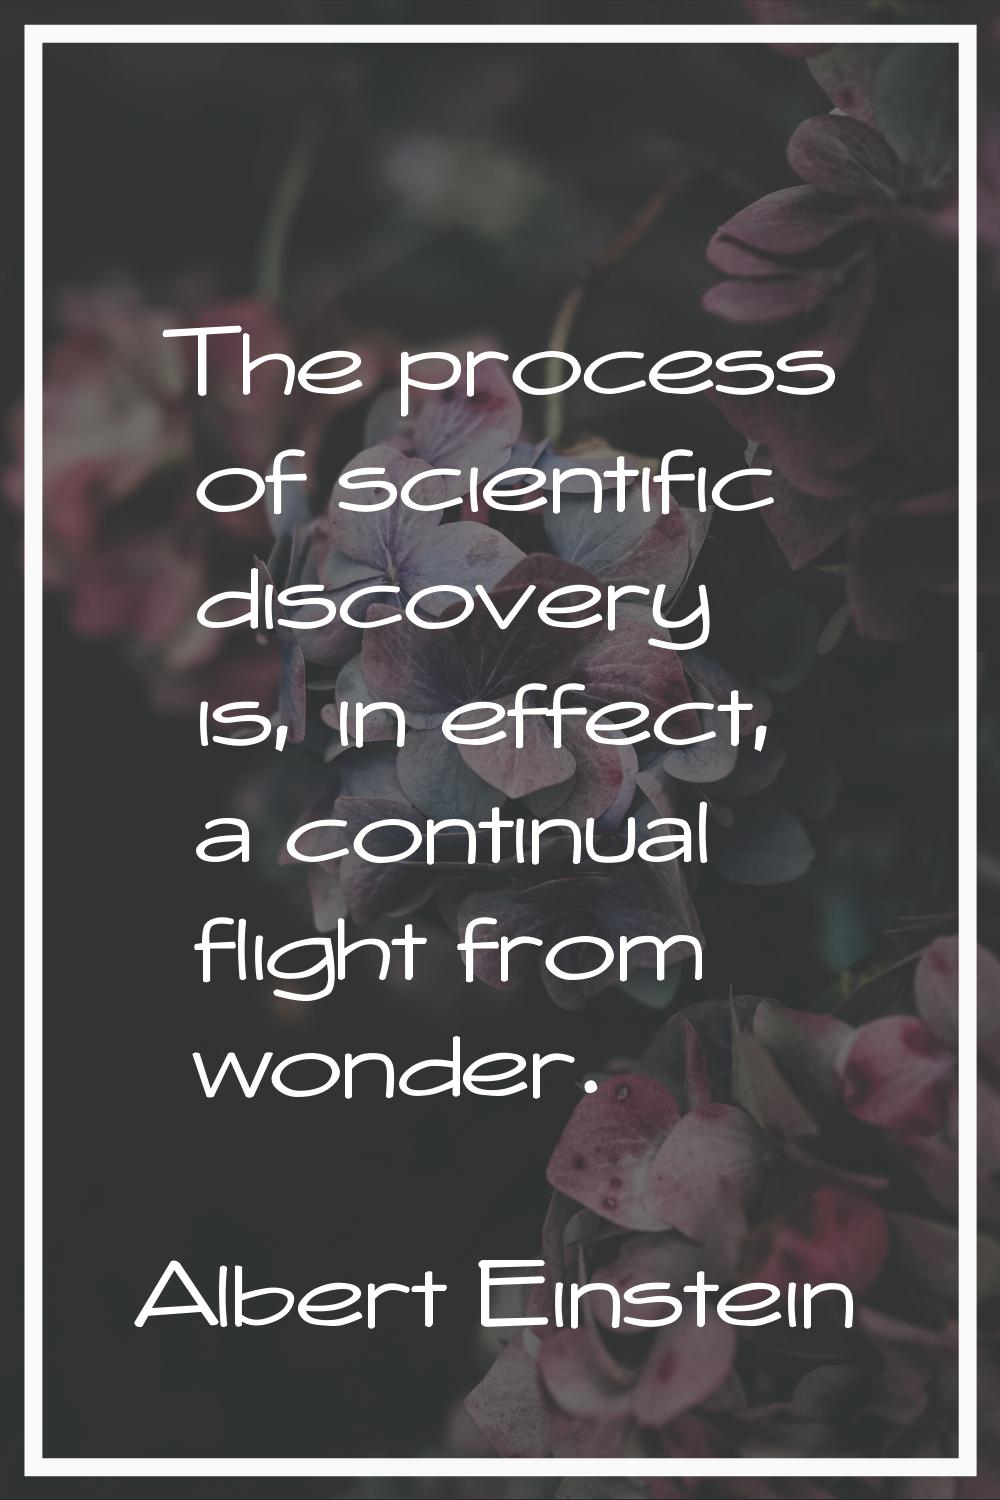 The process of scientific discovery is, in effect, a continual flight from wonder.